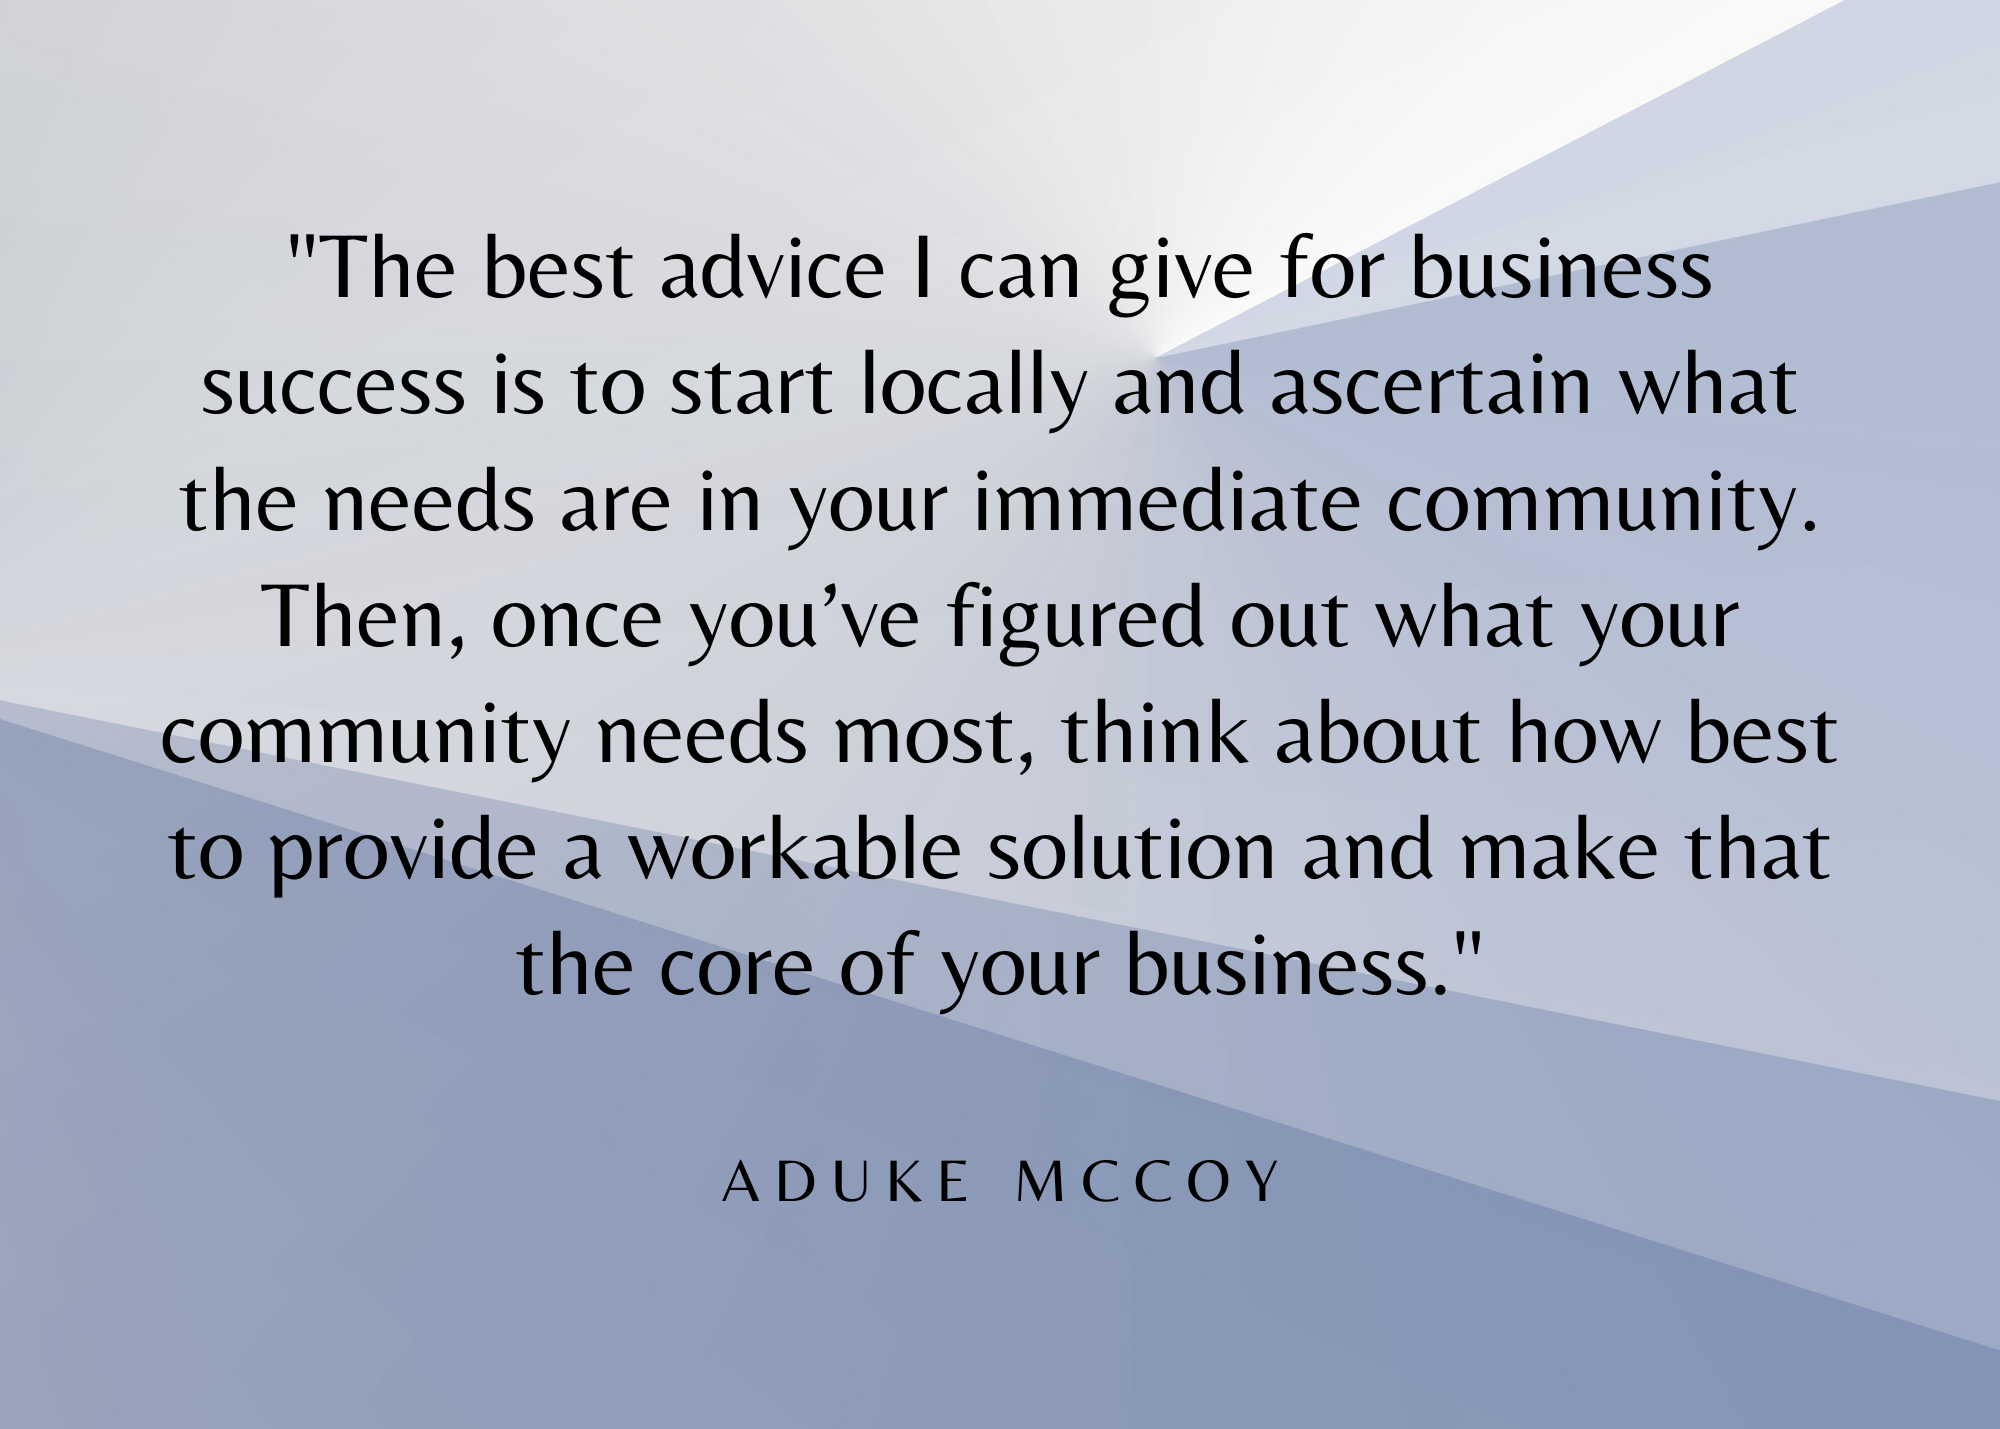 Business Consultant Aduke McCoy is Featured in a New Professional Profile